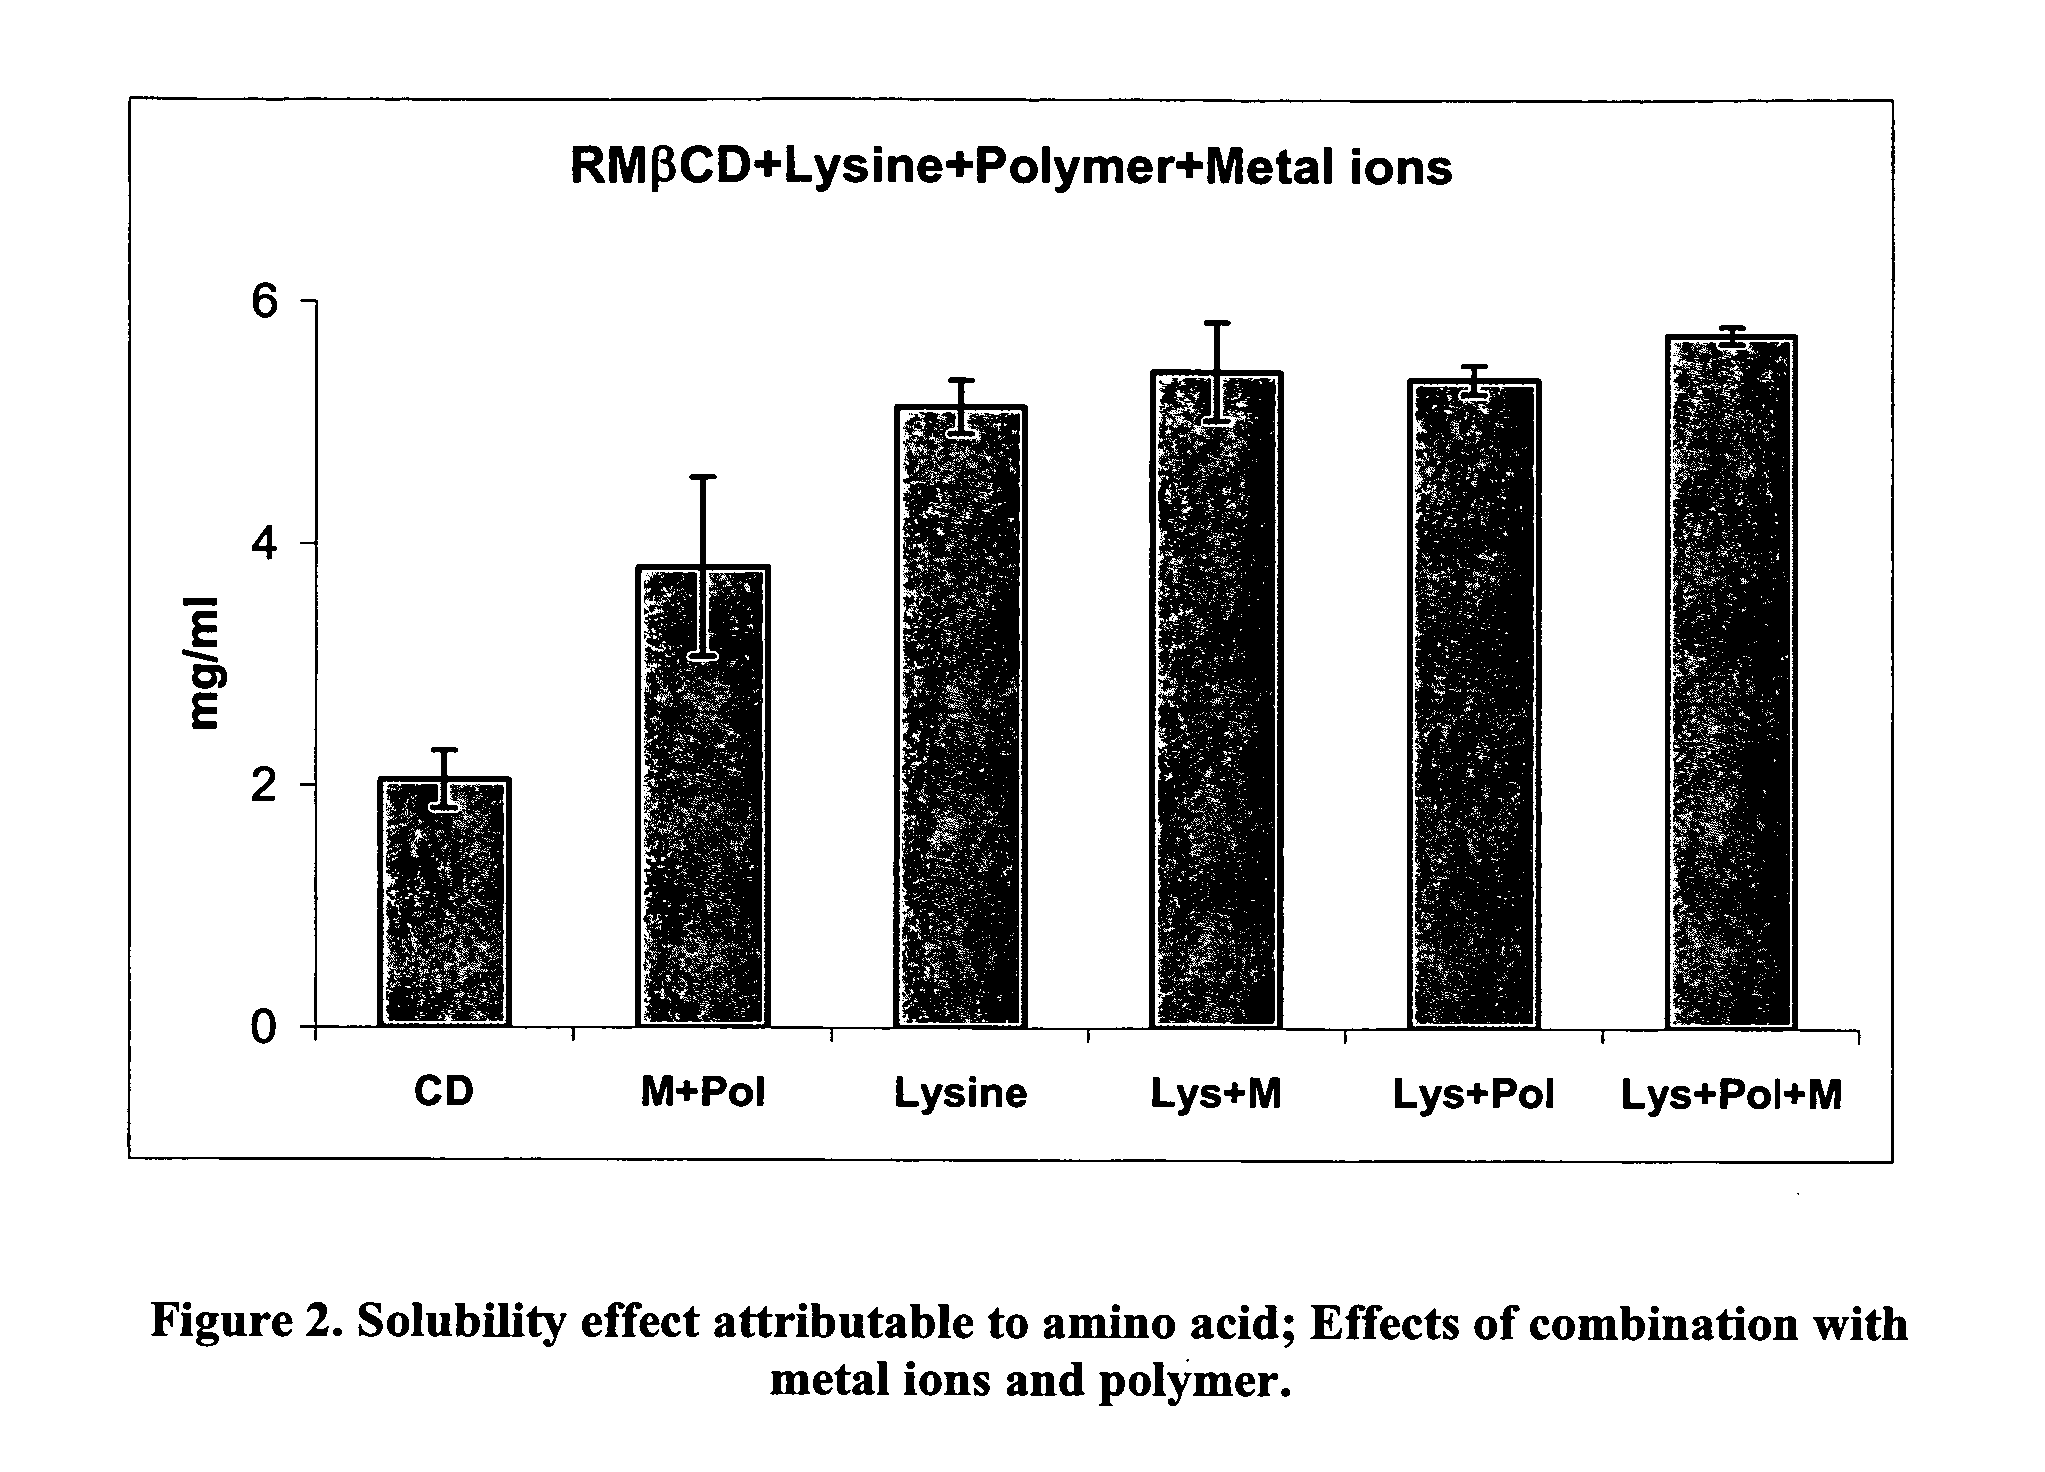 Formulations for non-parenteral use including hydrophobic cyclodextrins